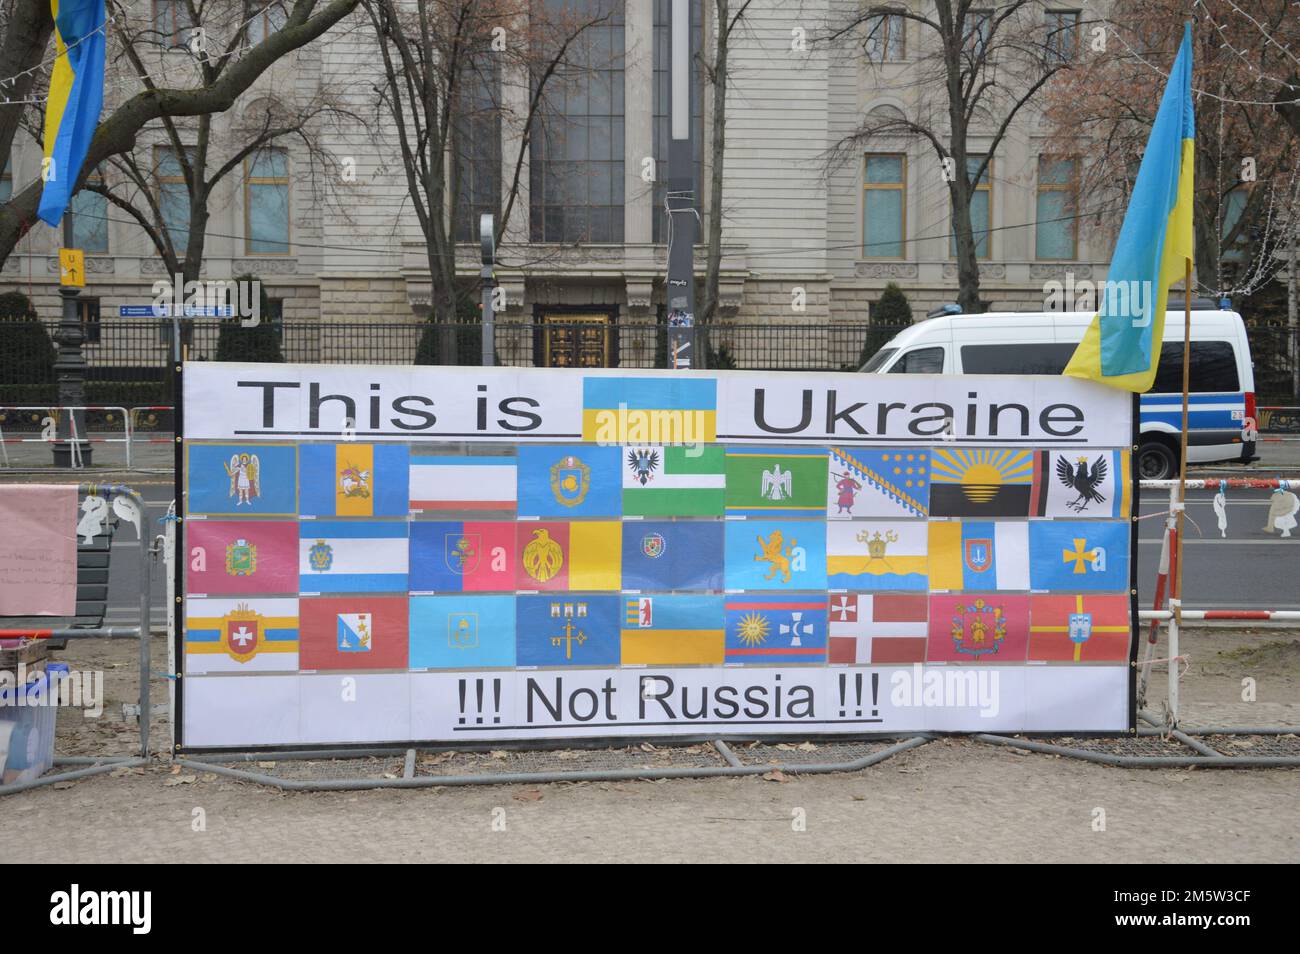 Berlin, Germany - December 17, 2022 - Protests in front of the Russian Embassy at Unter den Linden against the 2022 Russian invasion of Ukraine. (Photo by Markku Rainer Peltonen) Stock Photo